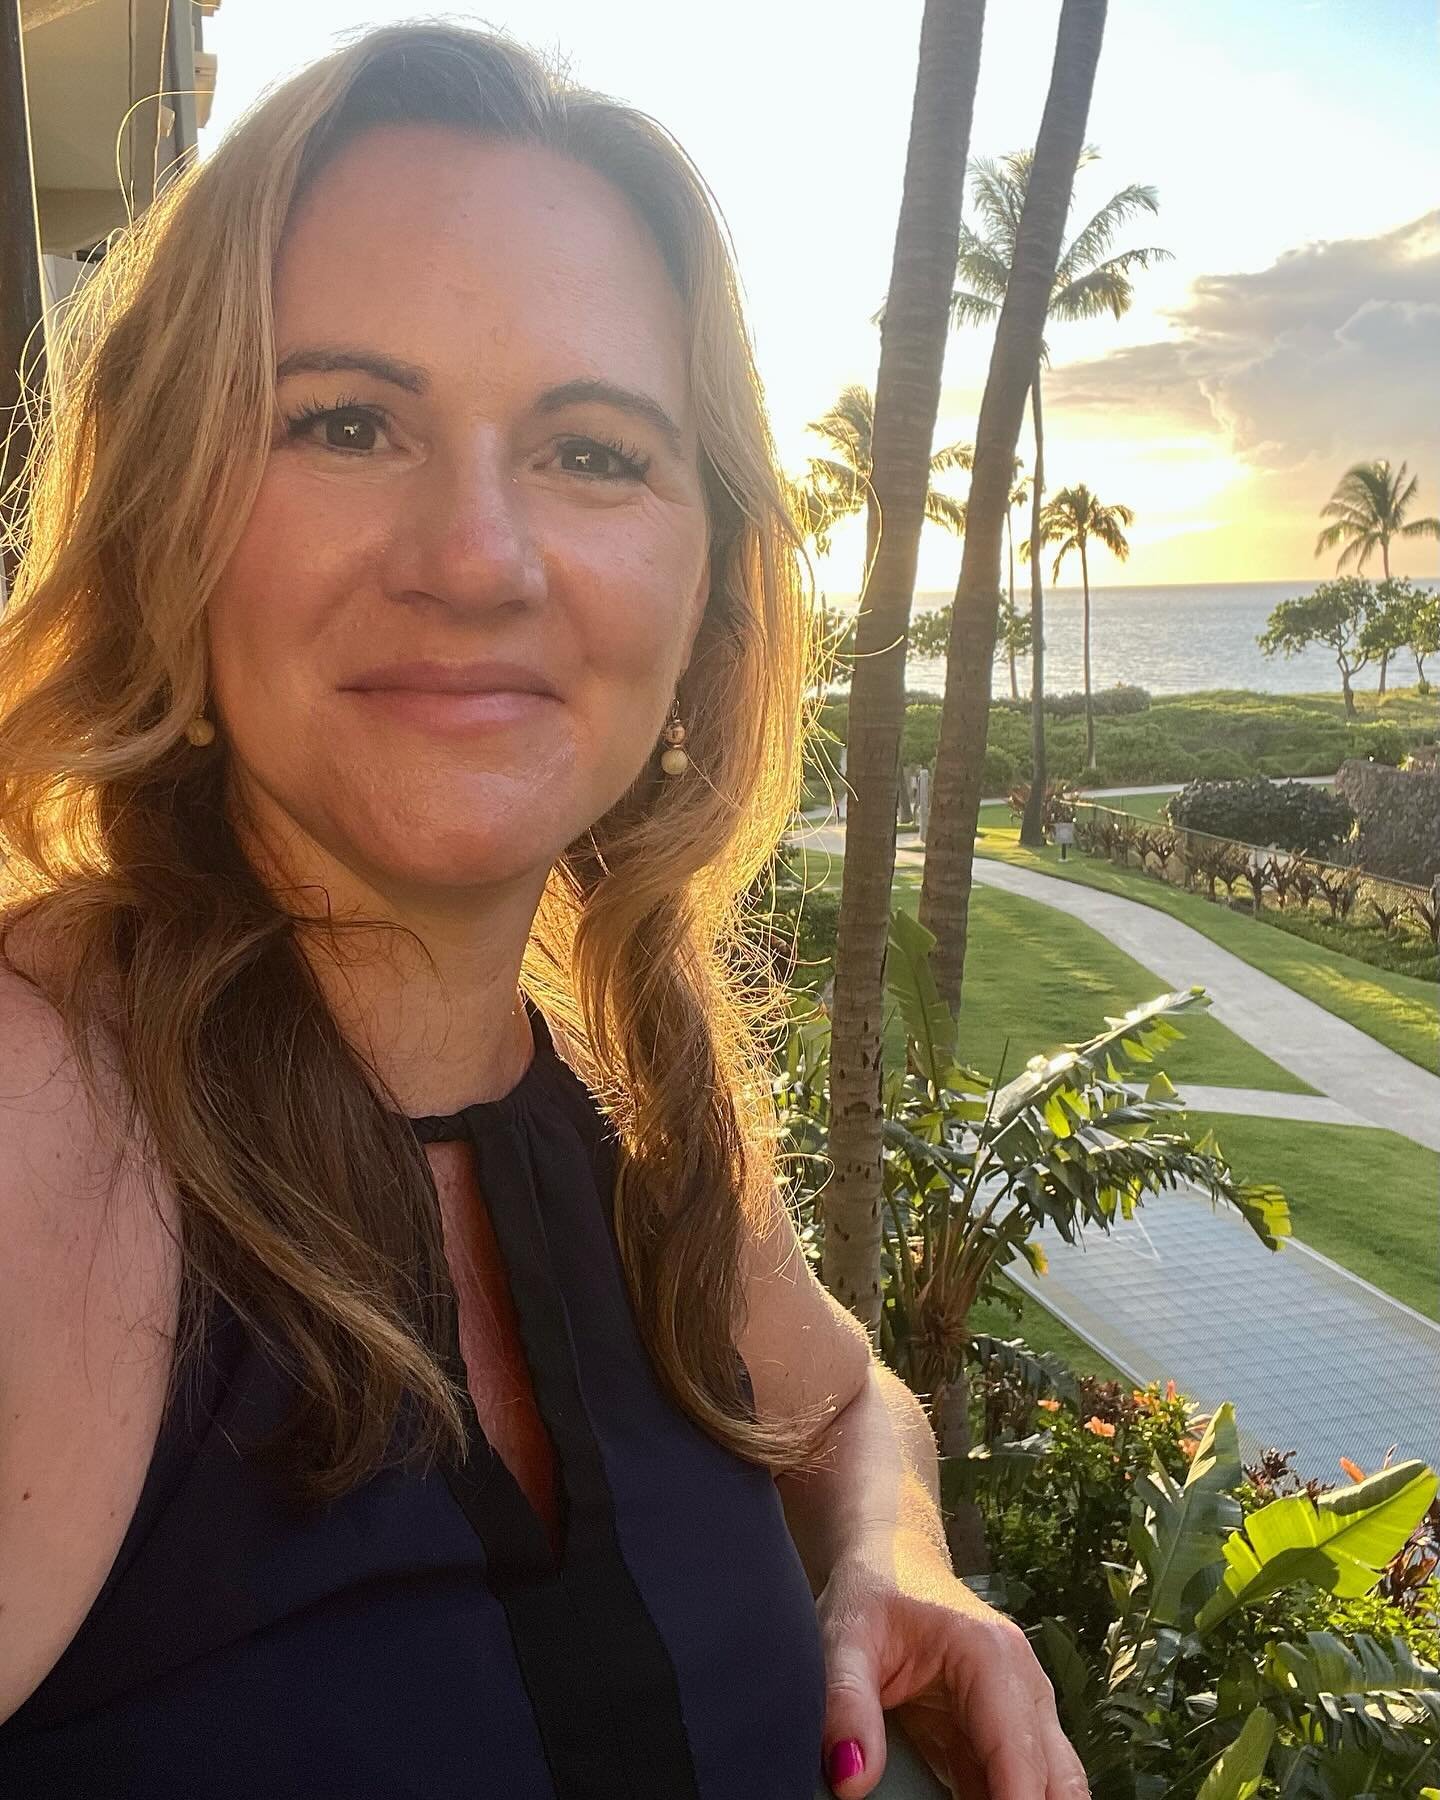 🌅 Resilience Reminder ☀️

Watching this sunset in Maui brought a profound calm and peace to my body and soul. Working hard in a Silicon Valley tech company and as a podcast host means my life is often hectic. It demands resilience and the ability to